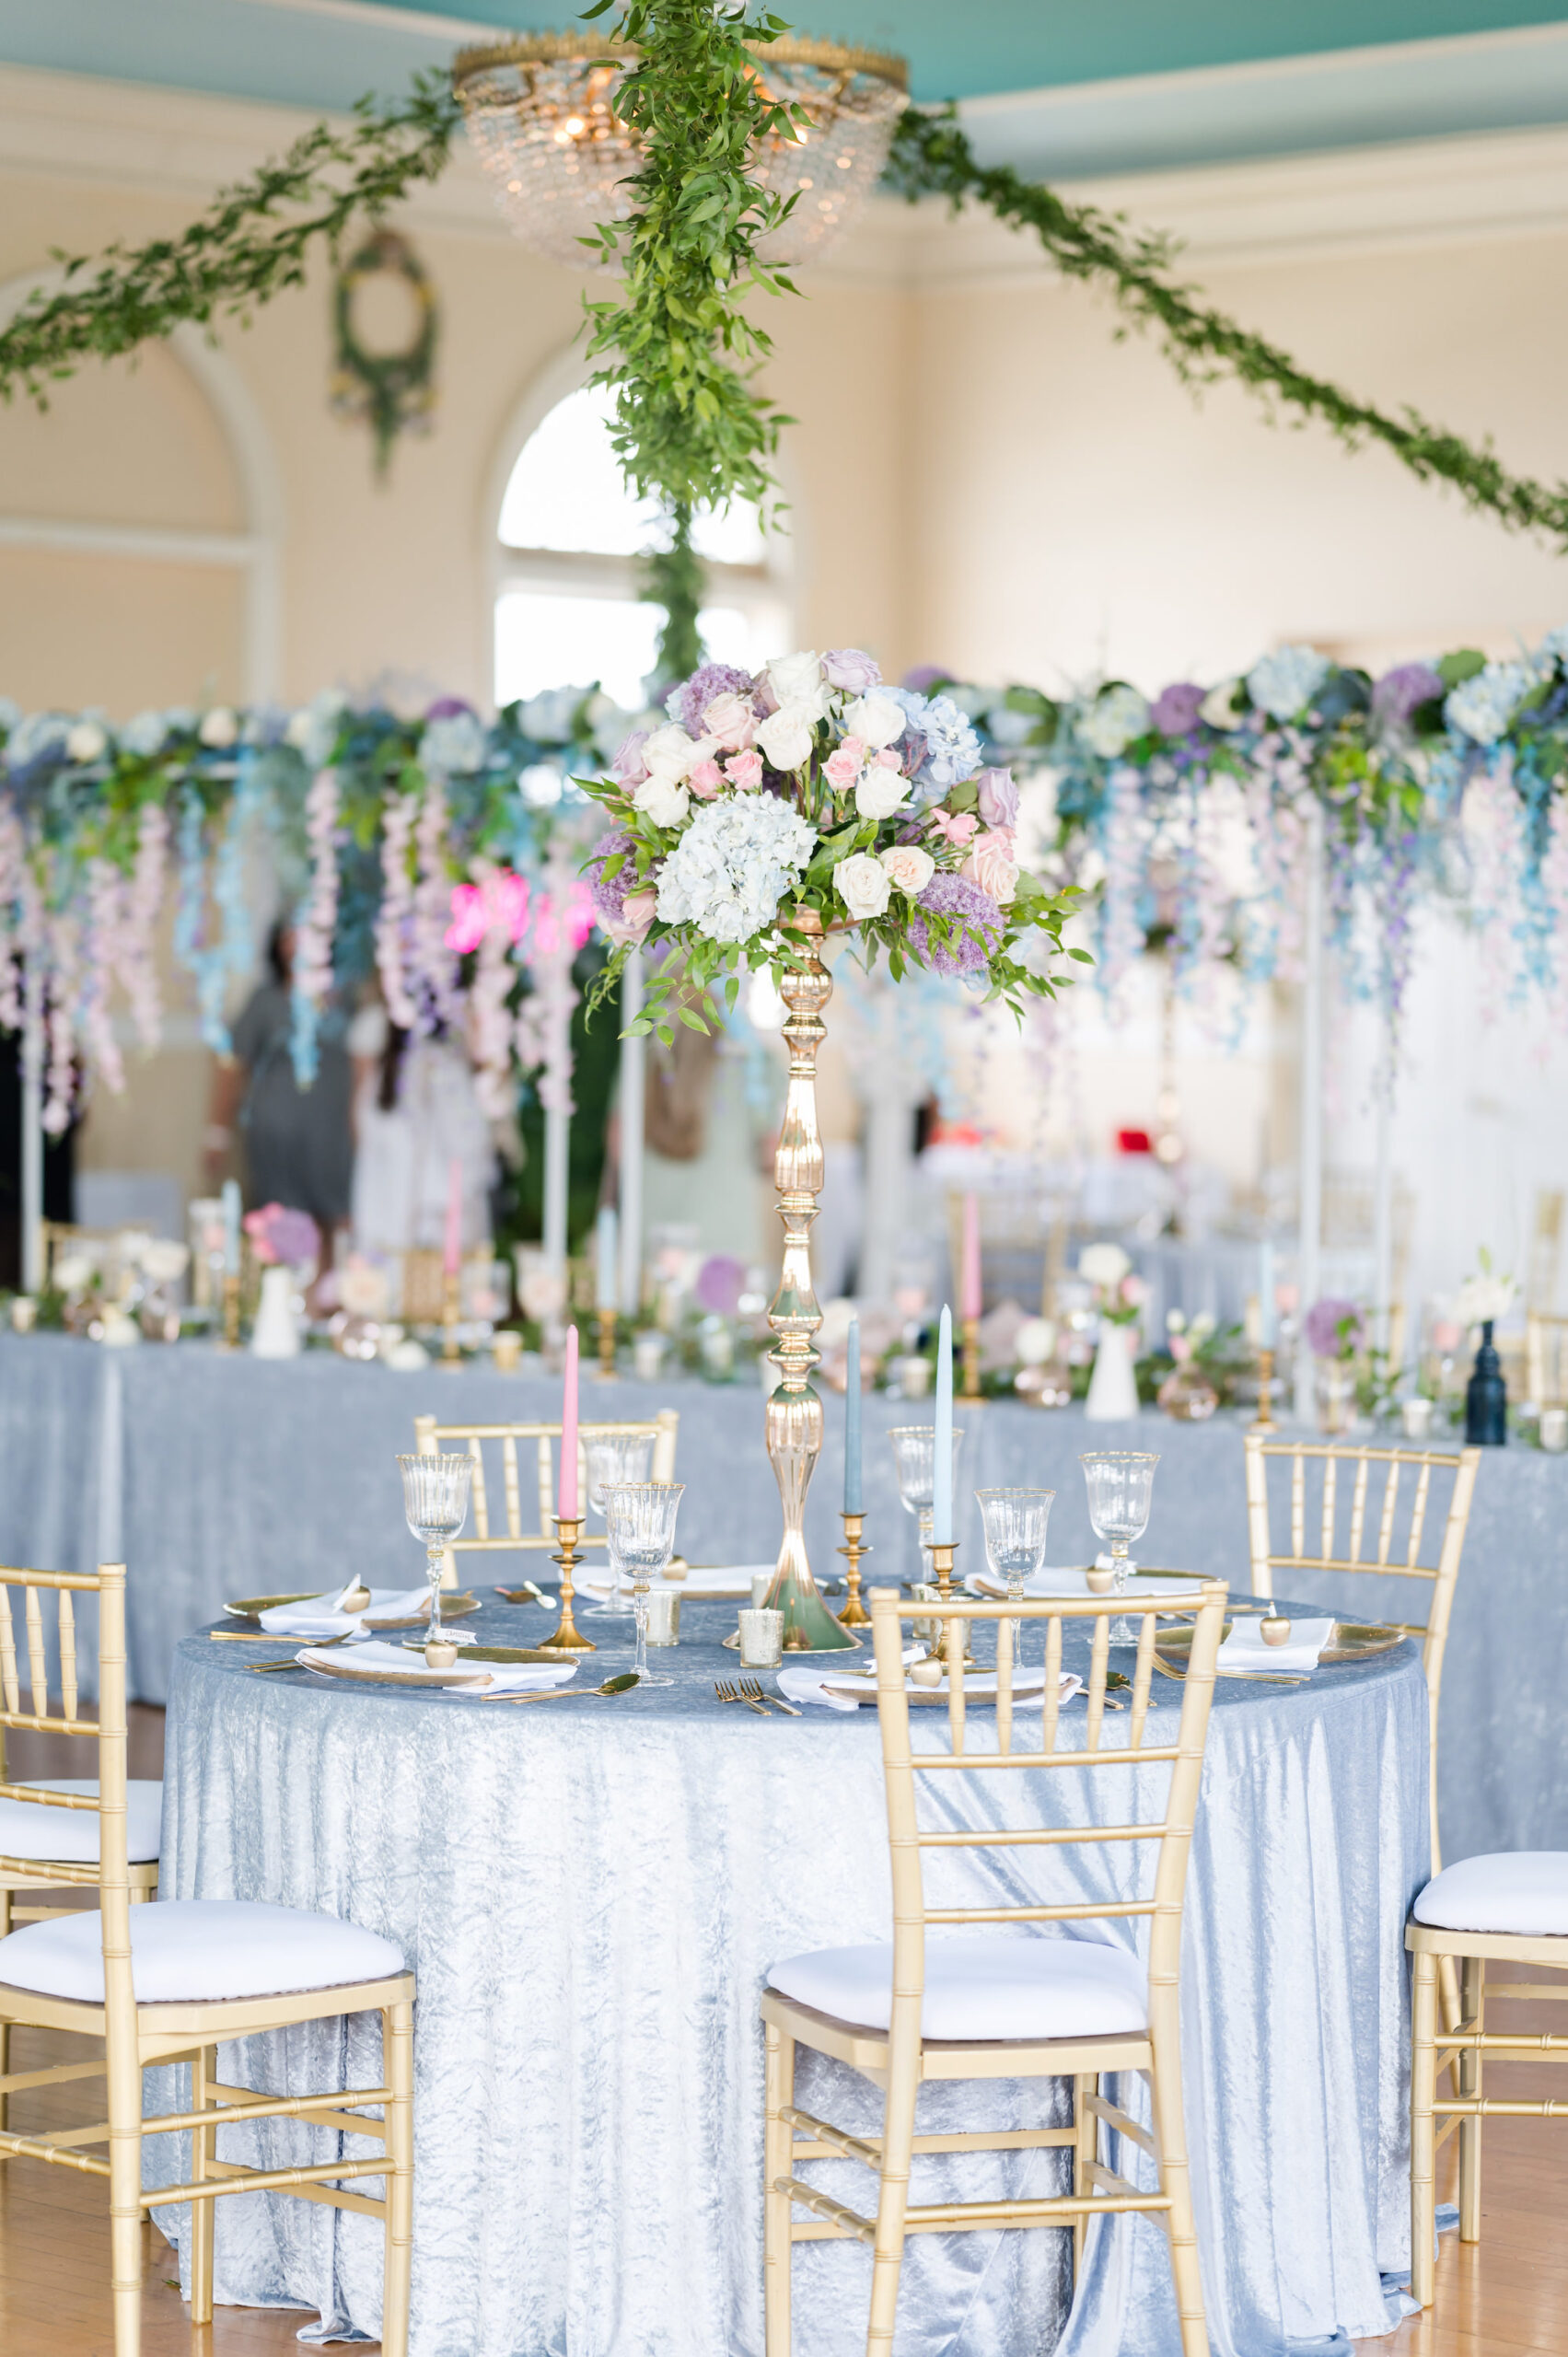 Whimsical Pastel Pink, Purple, and Blue Wedding Reception Centerpiece Inspiration | Tampa Bay Florist Save the Date Florida | Planner EventFull Weddings